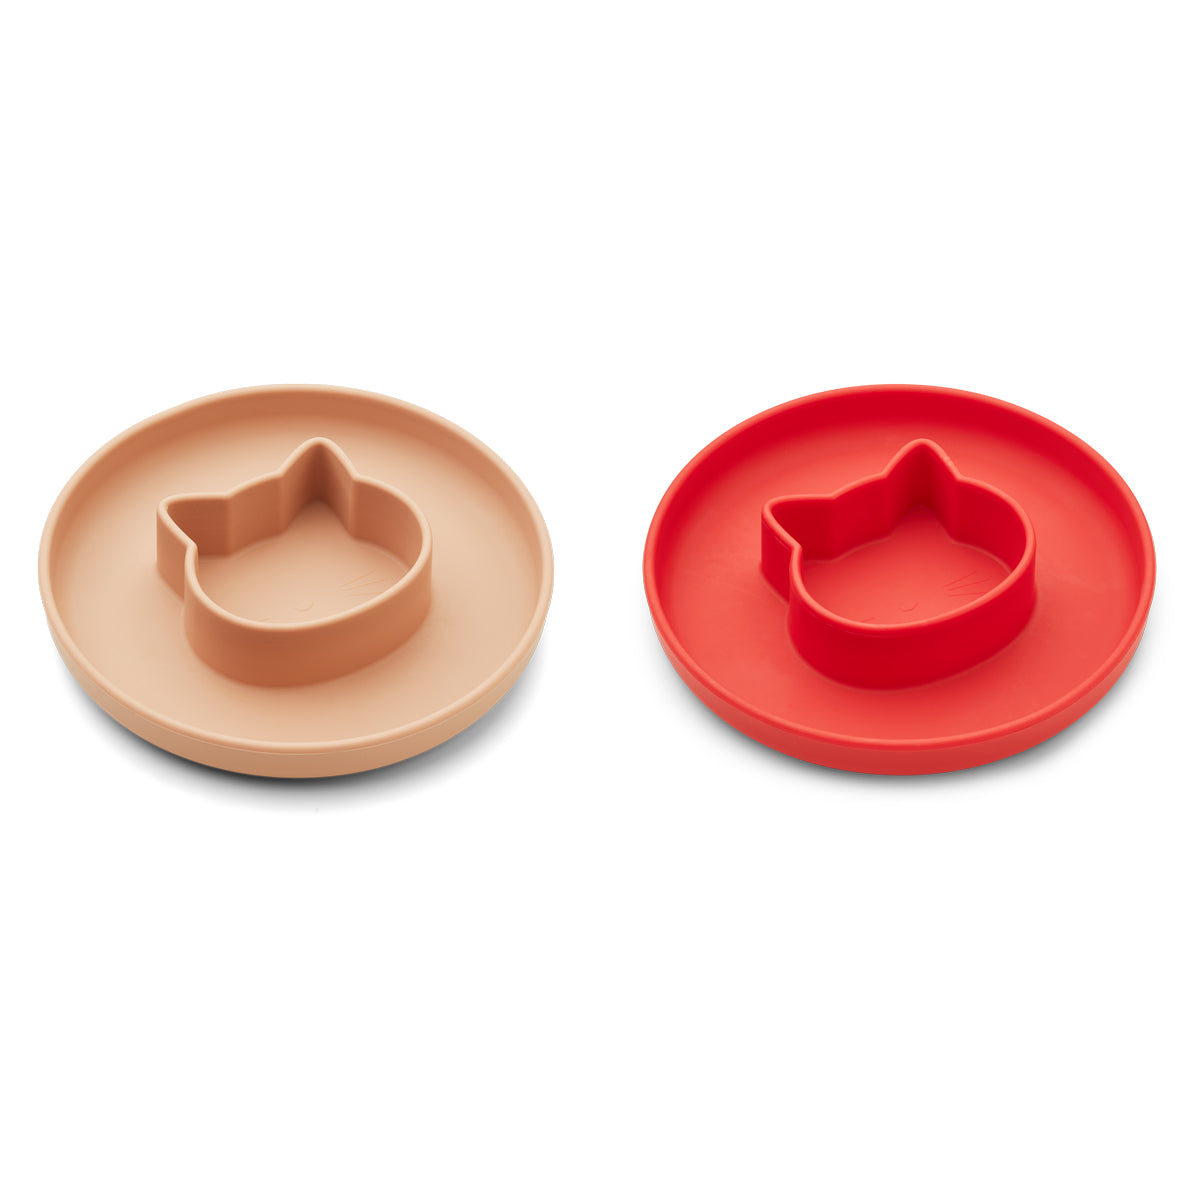 Liewood Gordon Plate 2 Pack - Cat apple red/tuscany rose mix silicone